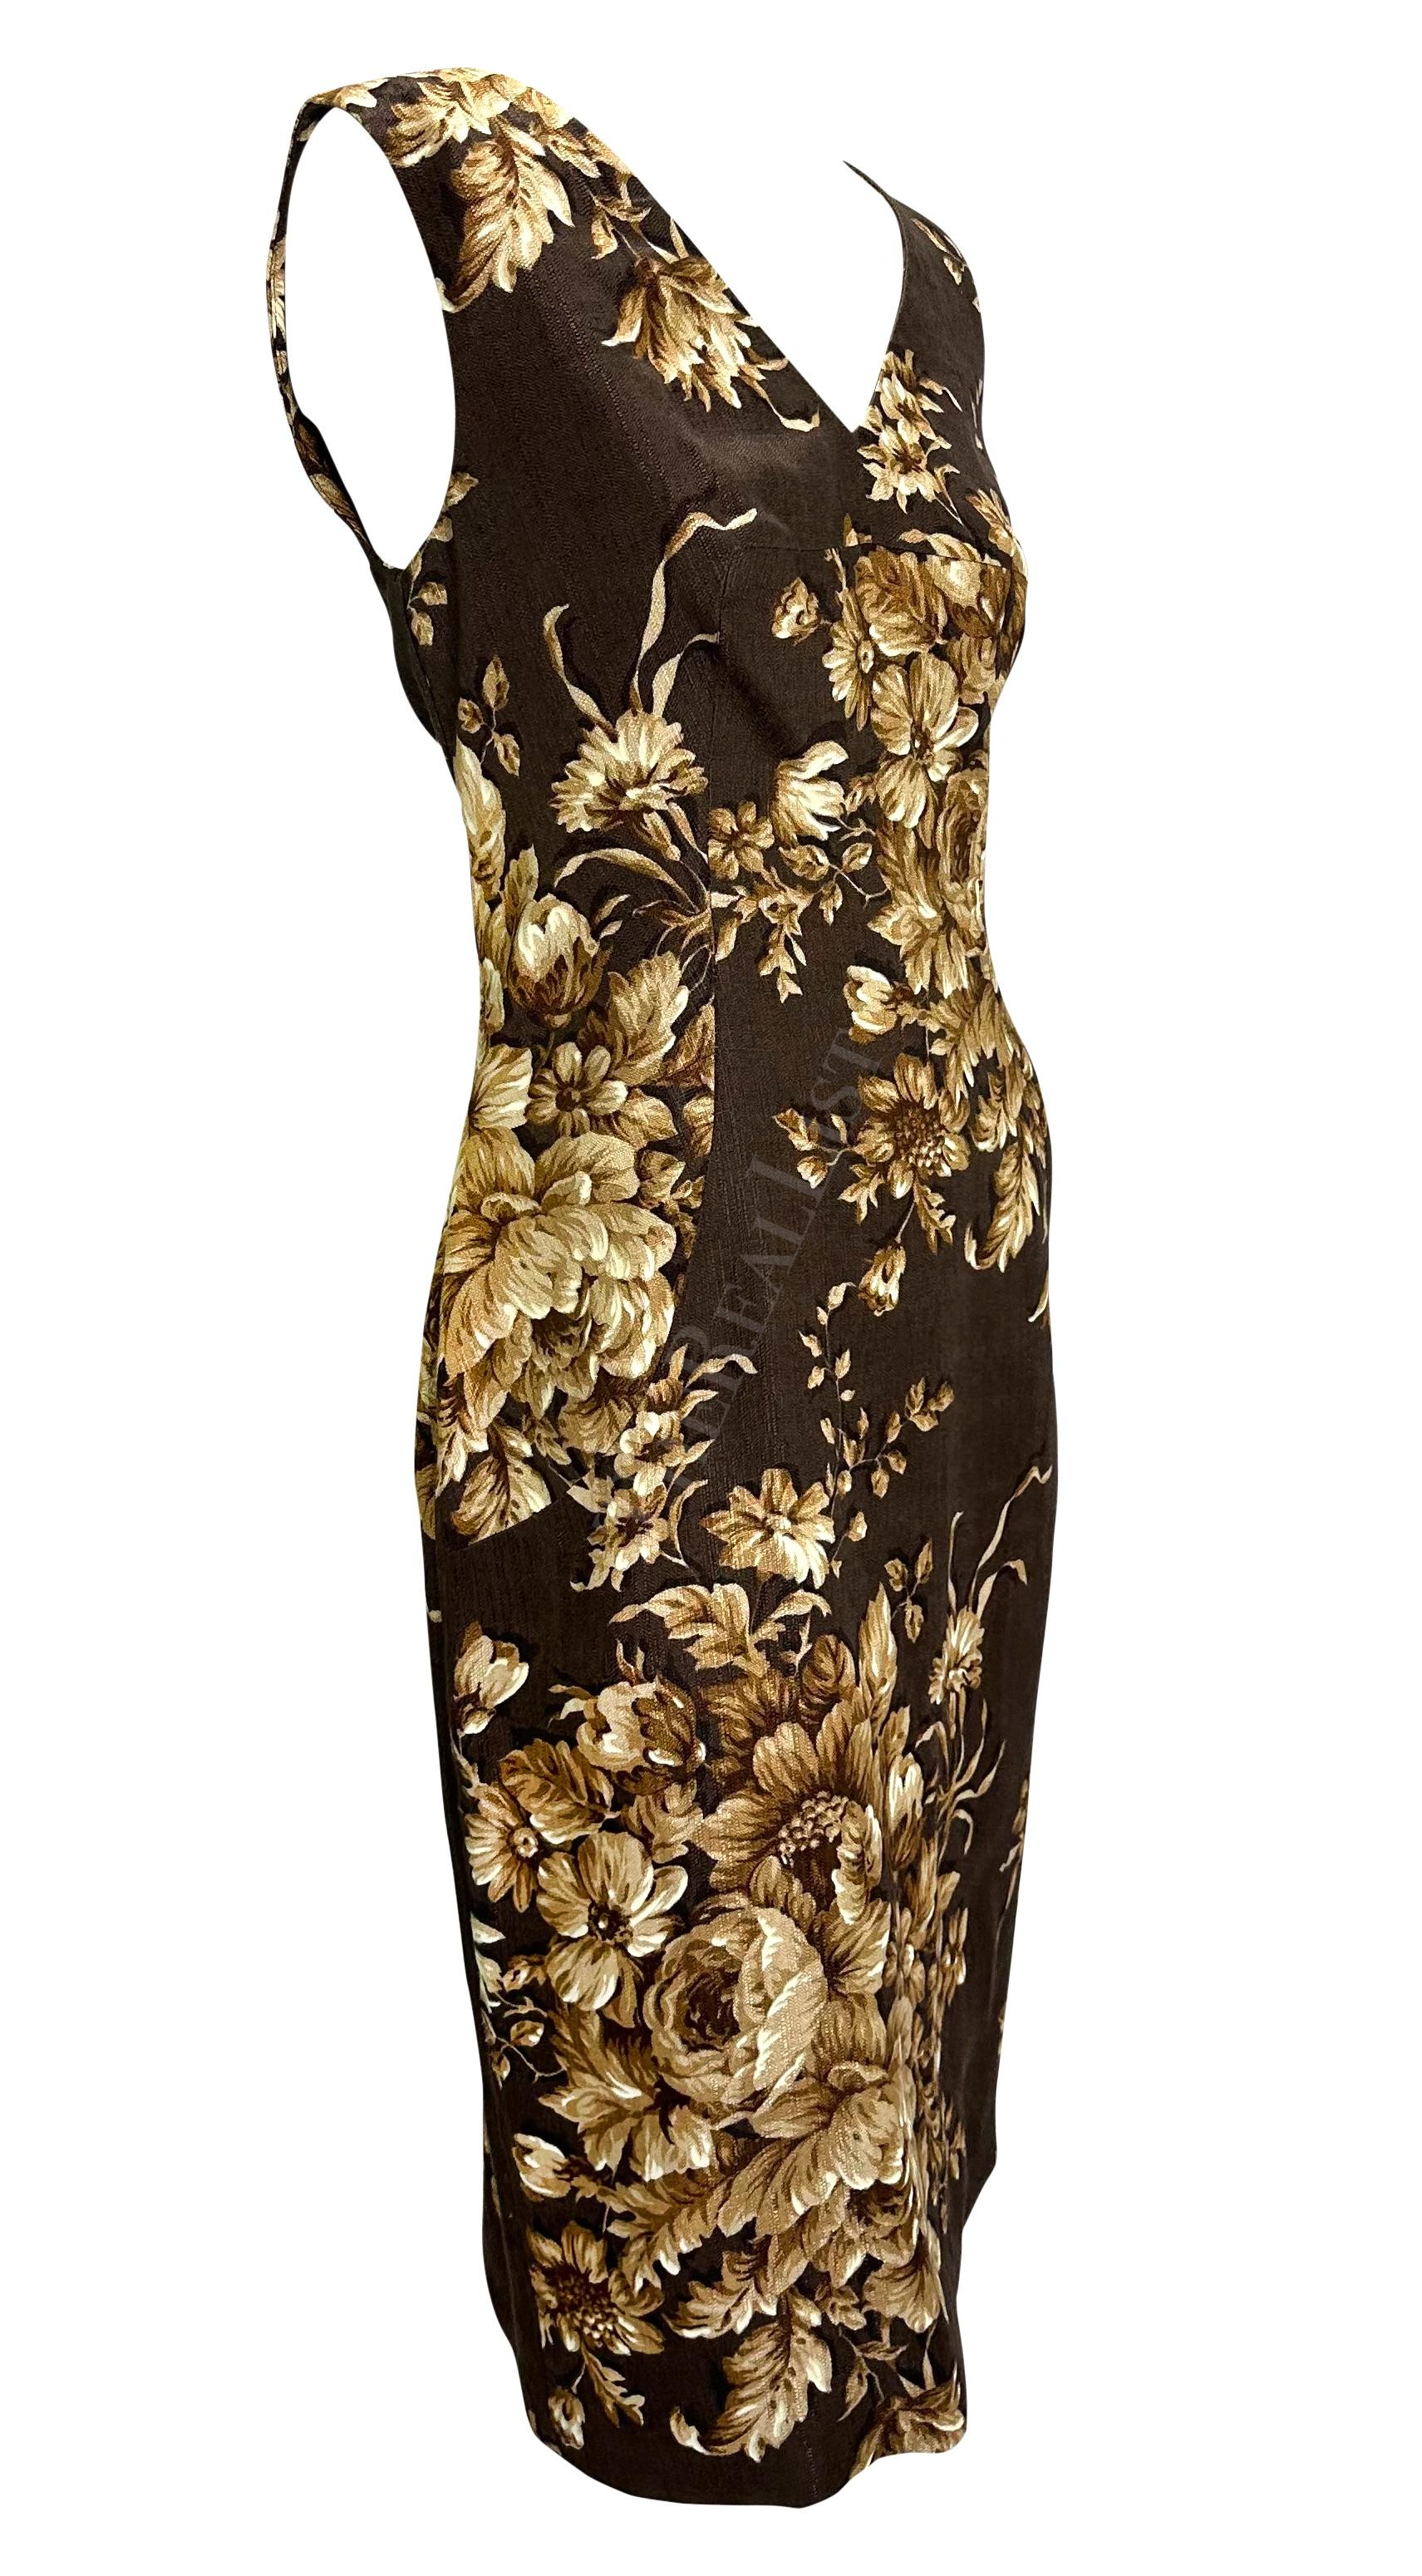 S/S 1997 Dolce & Gabbana Runway Brown Beige Floral Sleeveless Dress For Sale 2